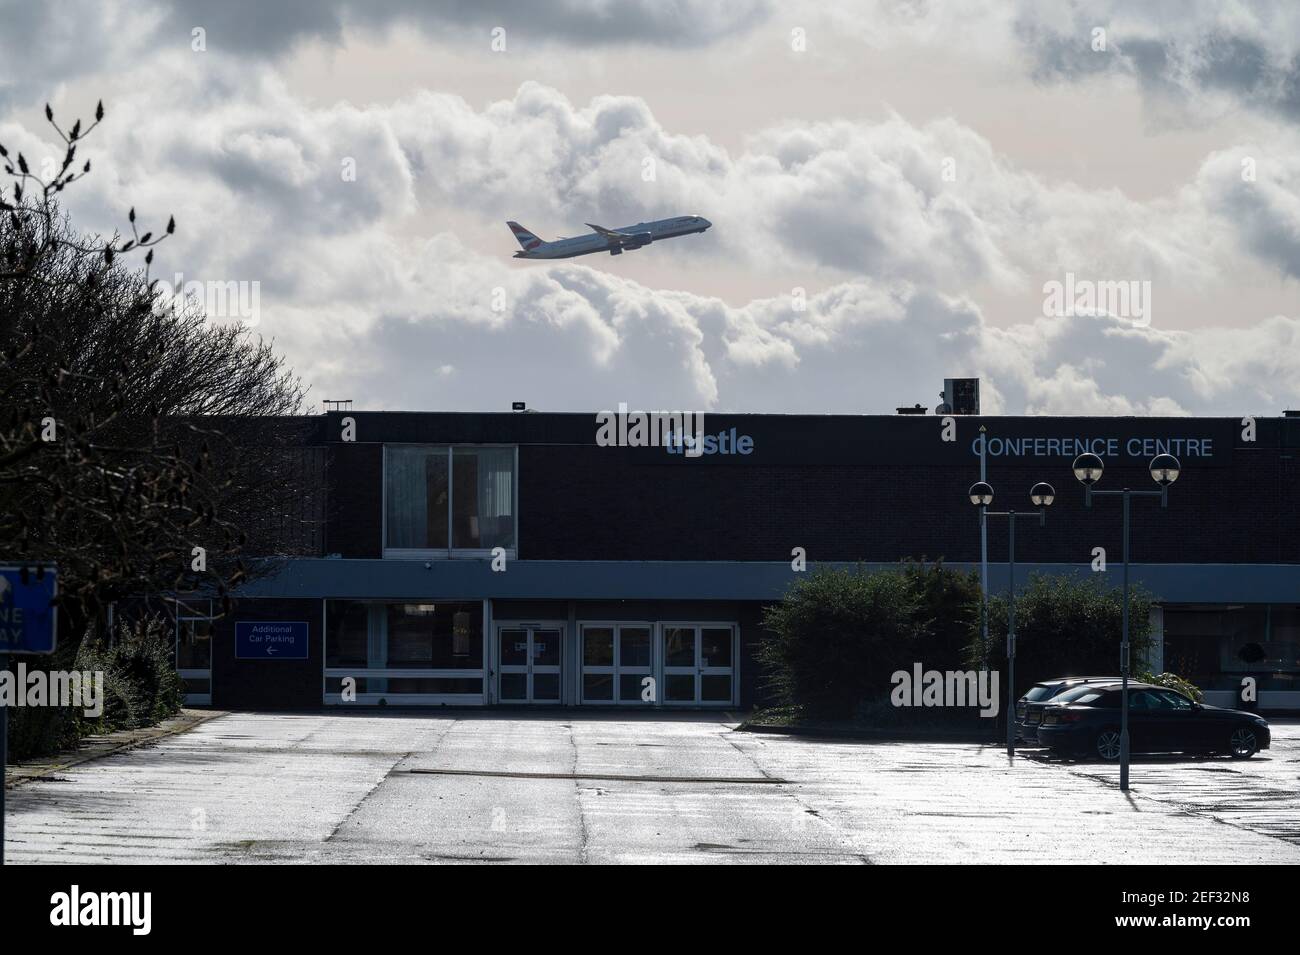 Beijing, Britain. 15th Feb, 2021. An airplane flies over a hotel near Heathrow Airport in London, Britain, Feb. 15, 2021. From Monday, all British and Irish citizens and British residents who arrive in England after being in the 'red list' of more than 30 high-risk countries now have to self-isolate in hotels. The 'red list' countries include South Africa, Portugal and South American nations. Credit: Ray Tang/Xinhua/Alamy Live News Stock Photo